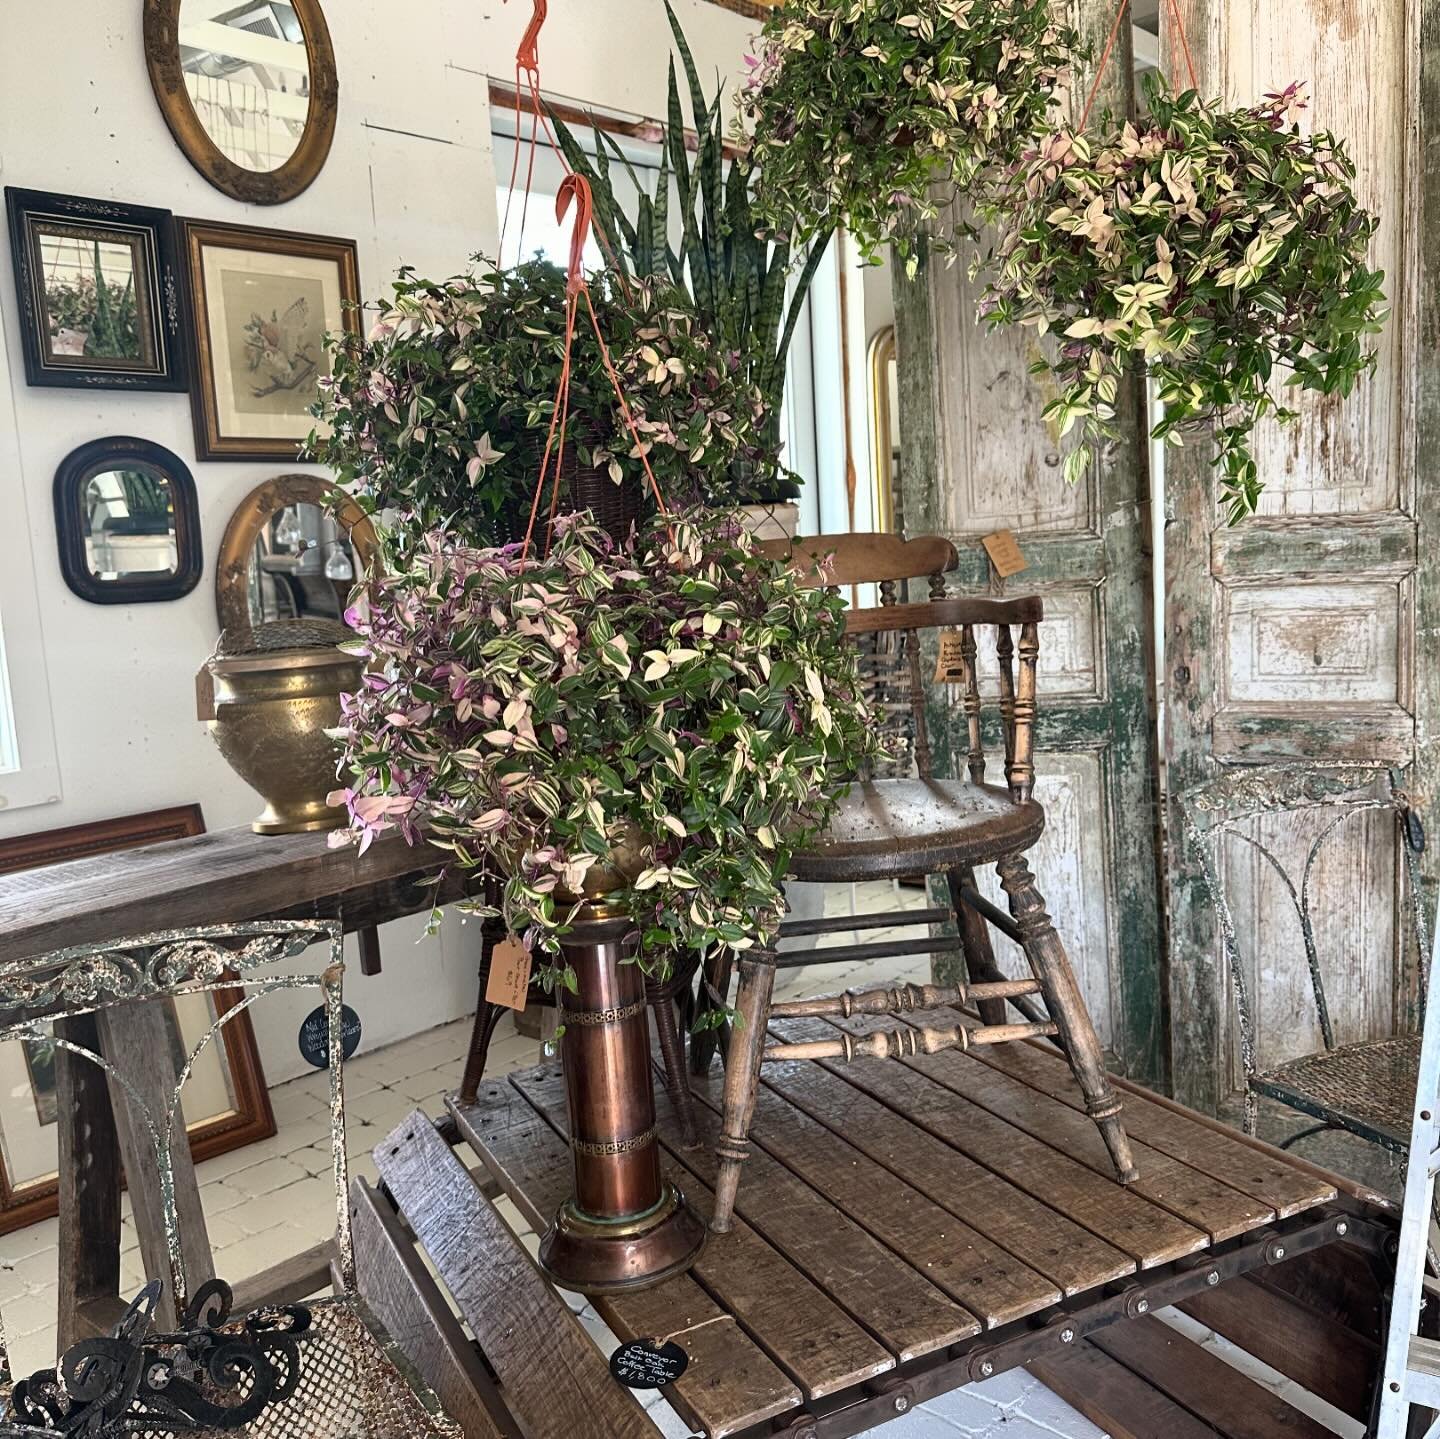 Busy behind the scenes staging . 
Creating inspiring vignettes .
Mark your calendar for Our Spring Reveal 

MAY 18 / 19 10am-5pm

SHOP and GREENHOUSE OPEN

#vintagestyle #junker #picker #vintagestore #interiordesign #interiordecor #antiqueshop #garde